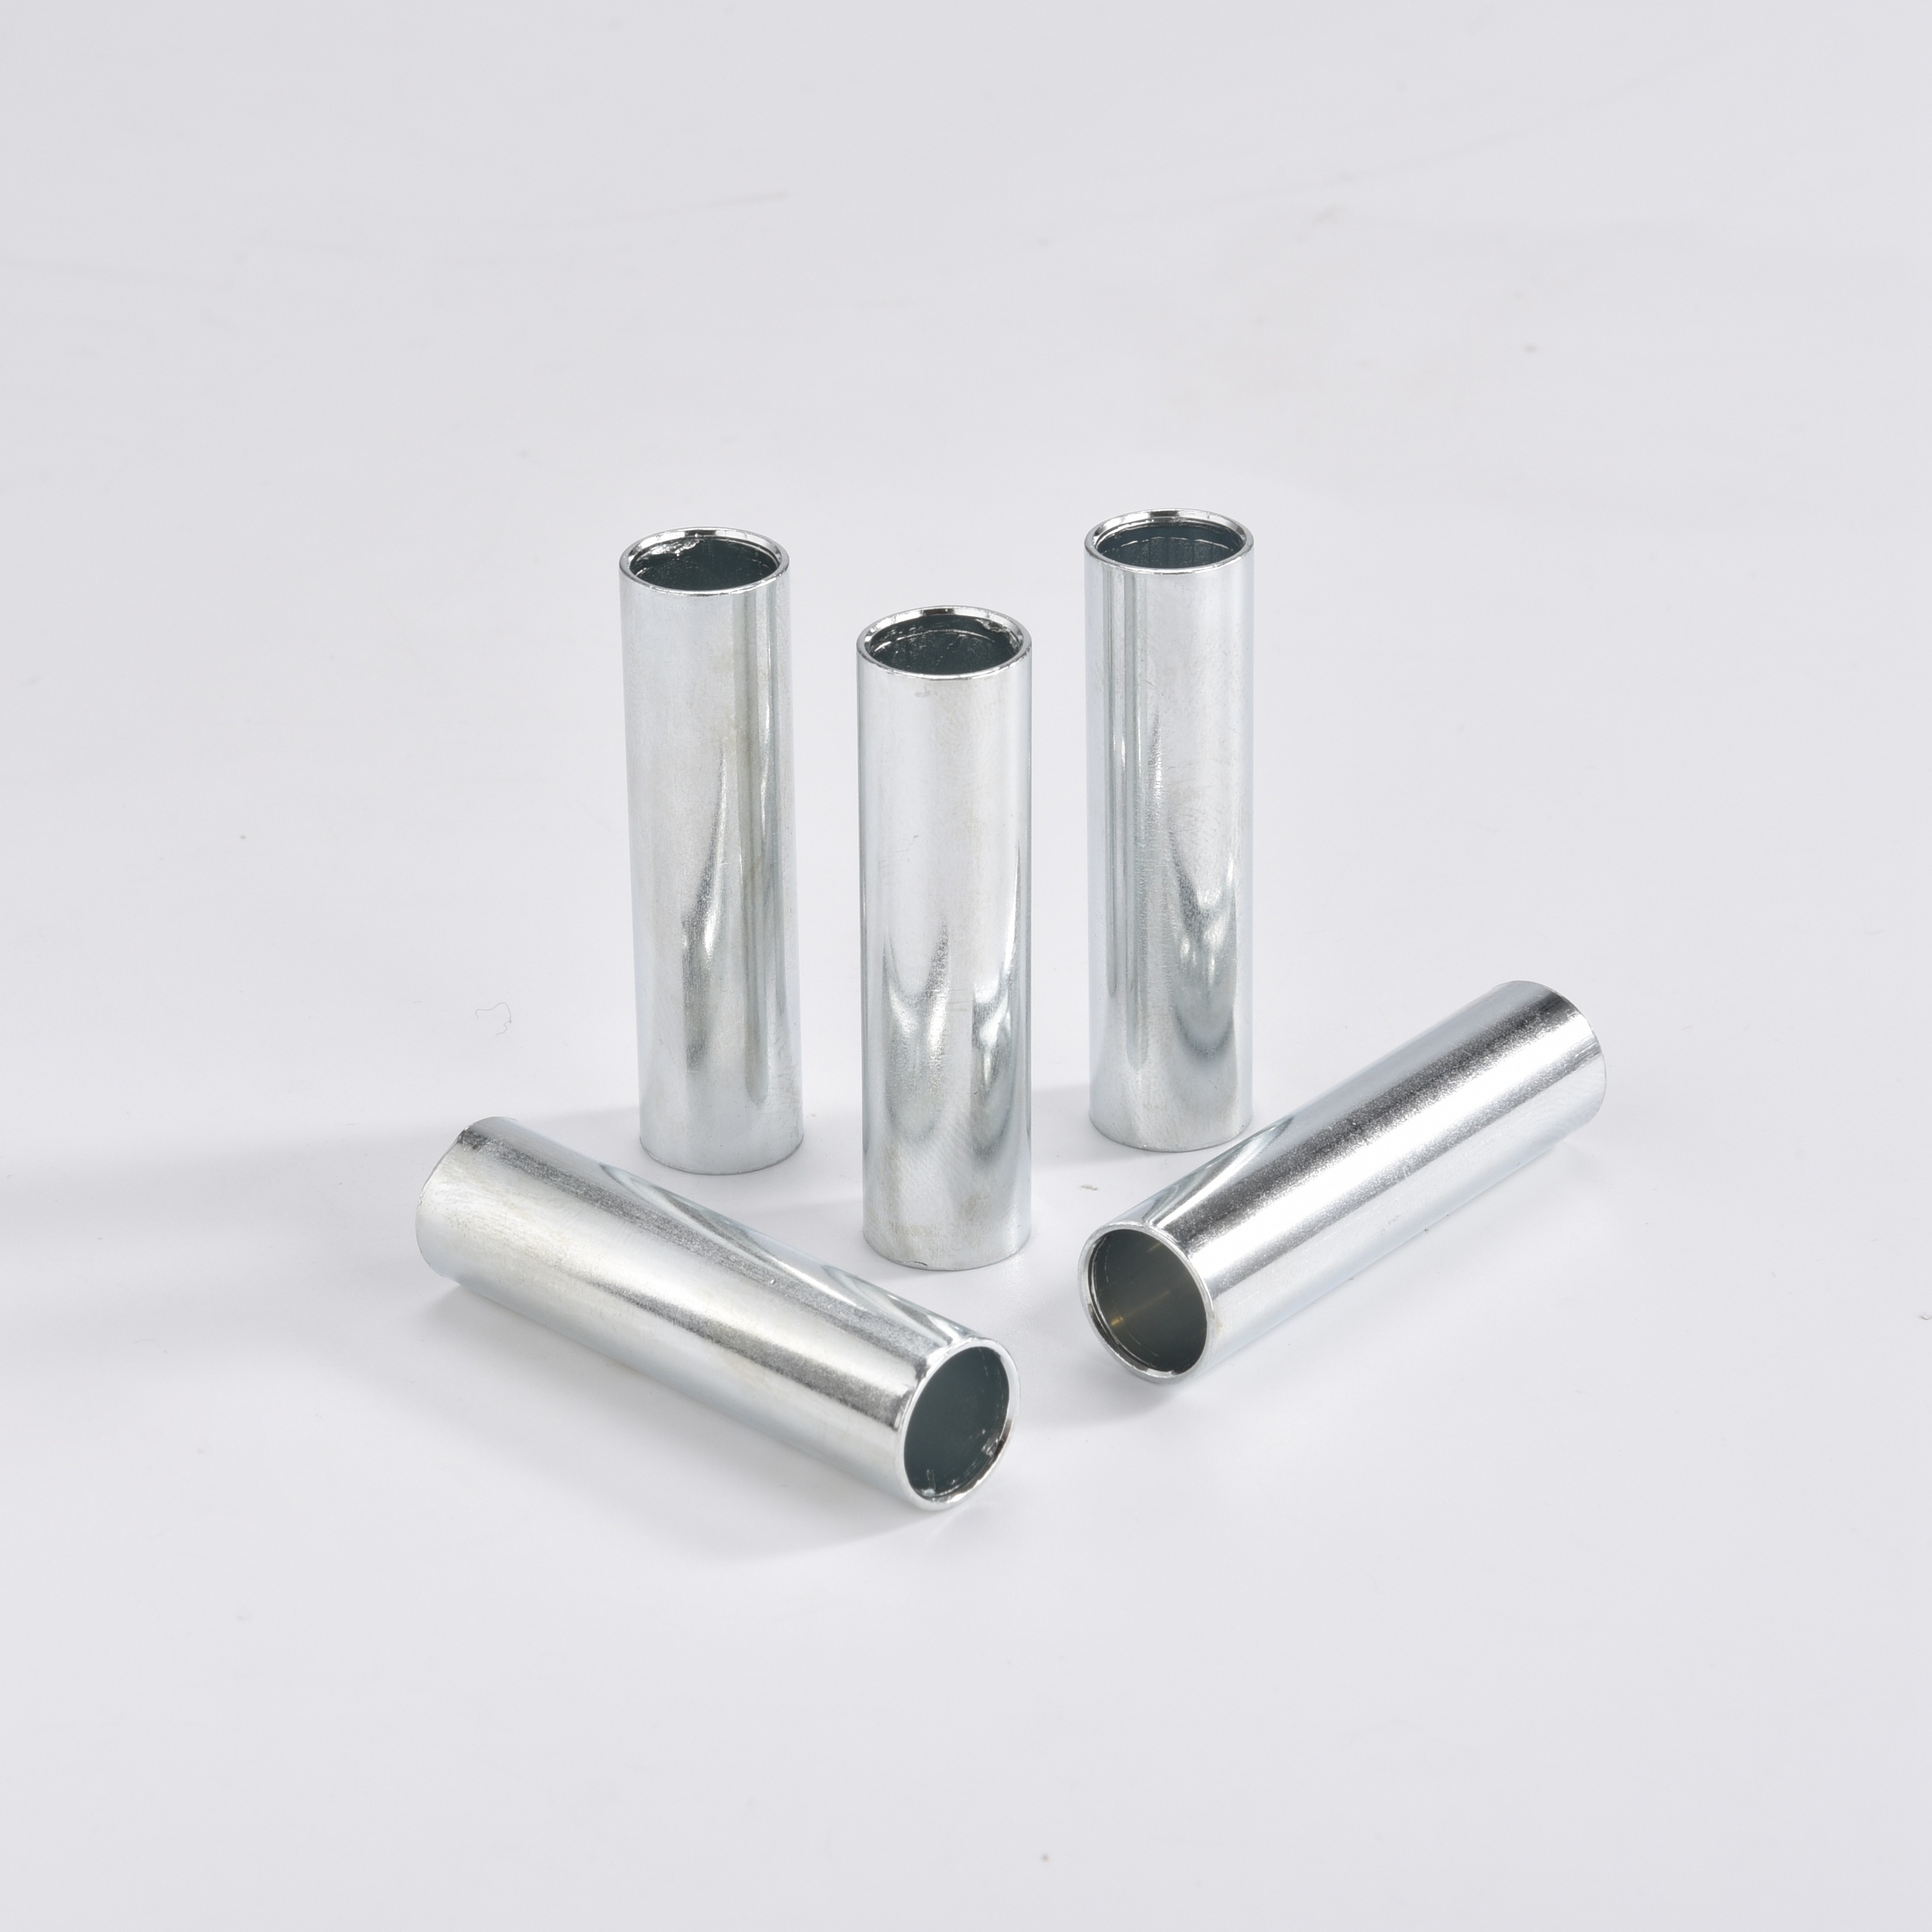 stainless steel hollow pipe